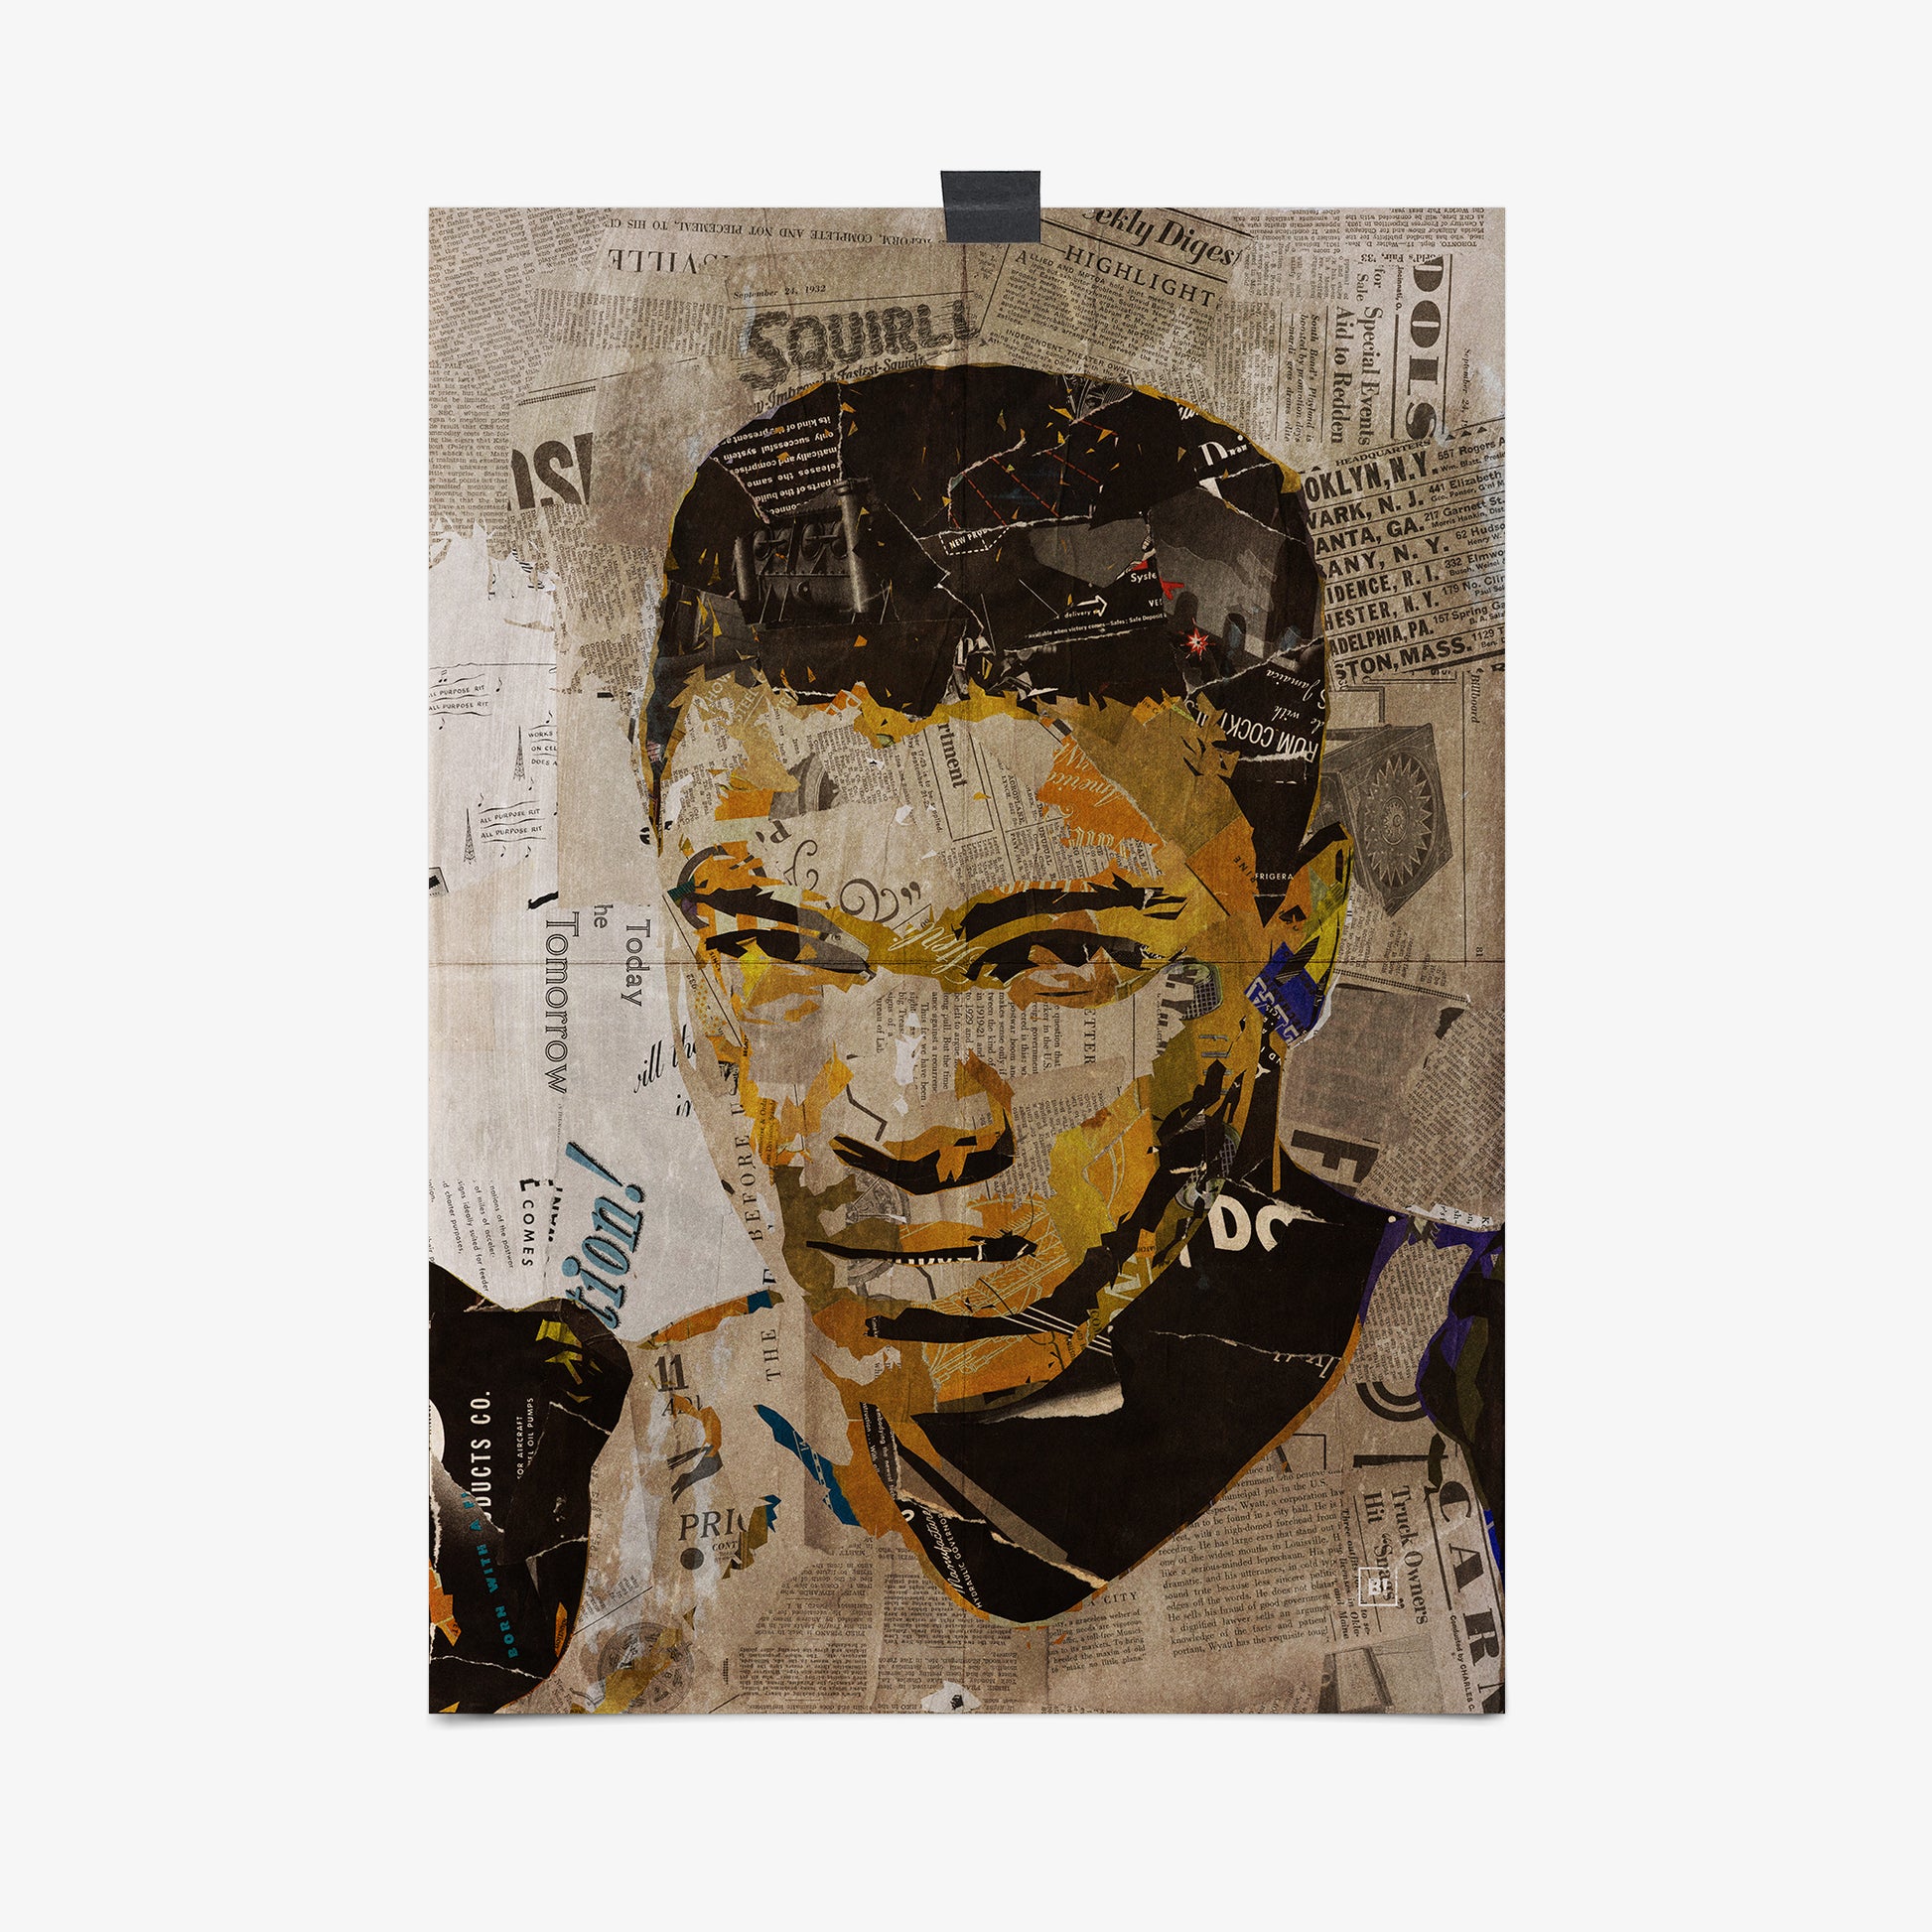 Be inspired by our iconic collage portrait art print of Muhammad Ali. This artwork was printed using the giclée process on archival acid-free paper, capturing its timeless beauty in every detail.